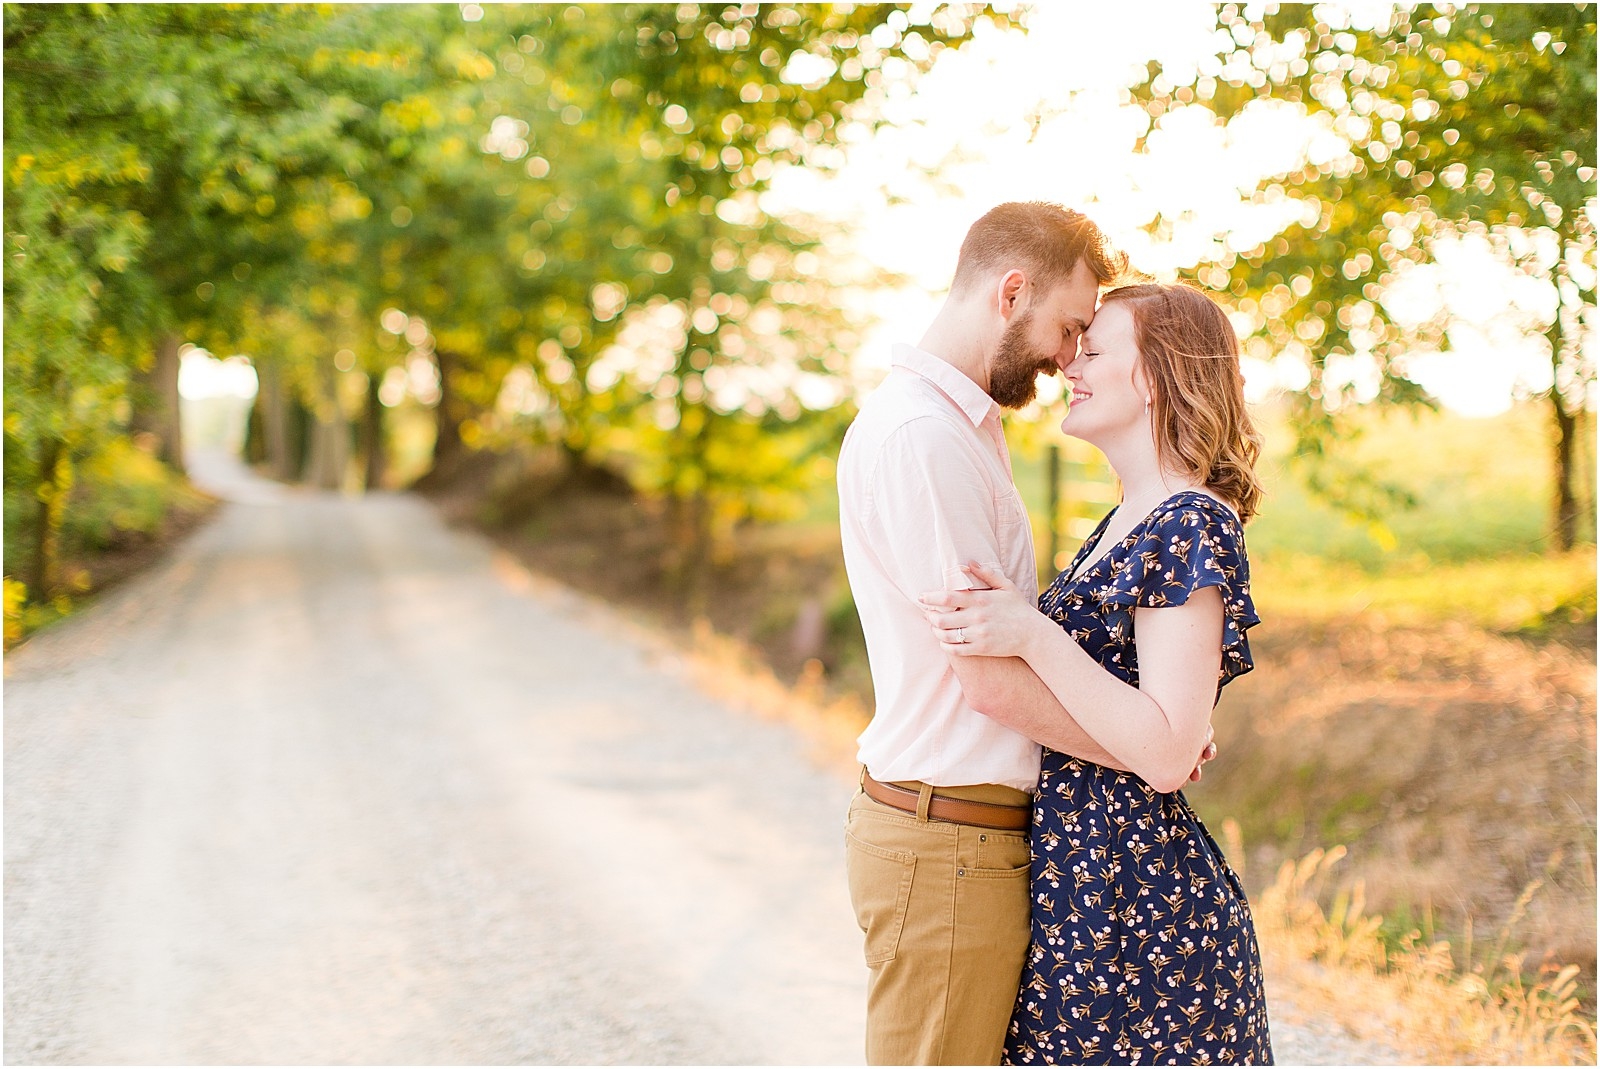 Amy and Logan | The Corner House Bed and Breakfast | Engagement Session021.jpg